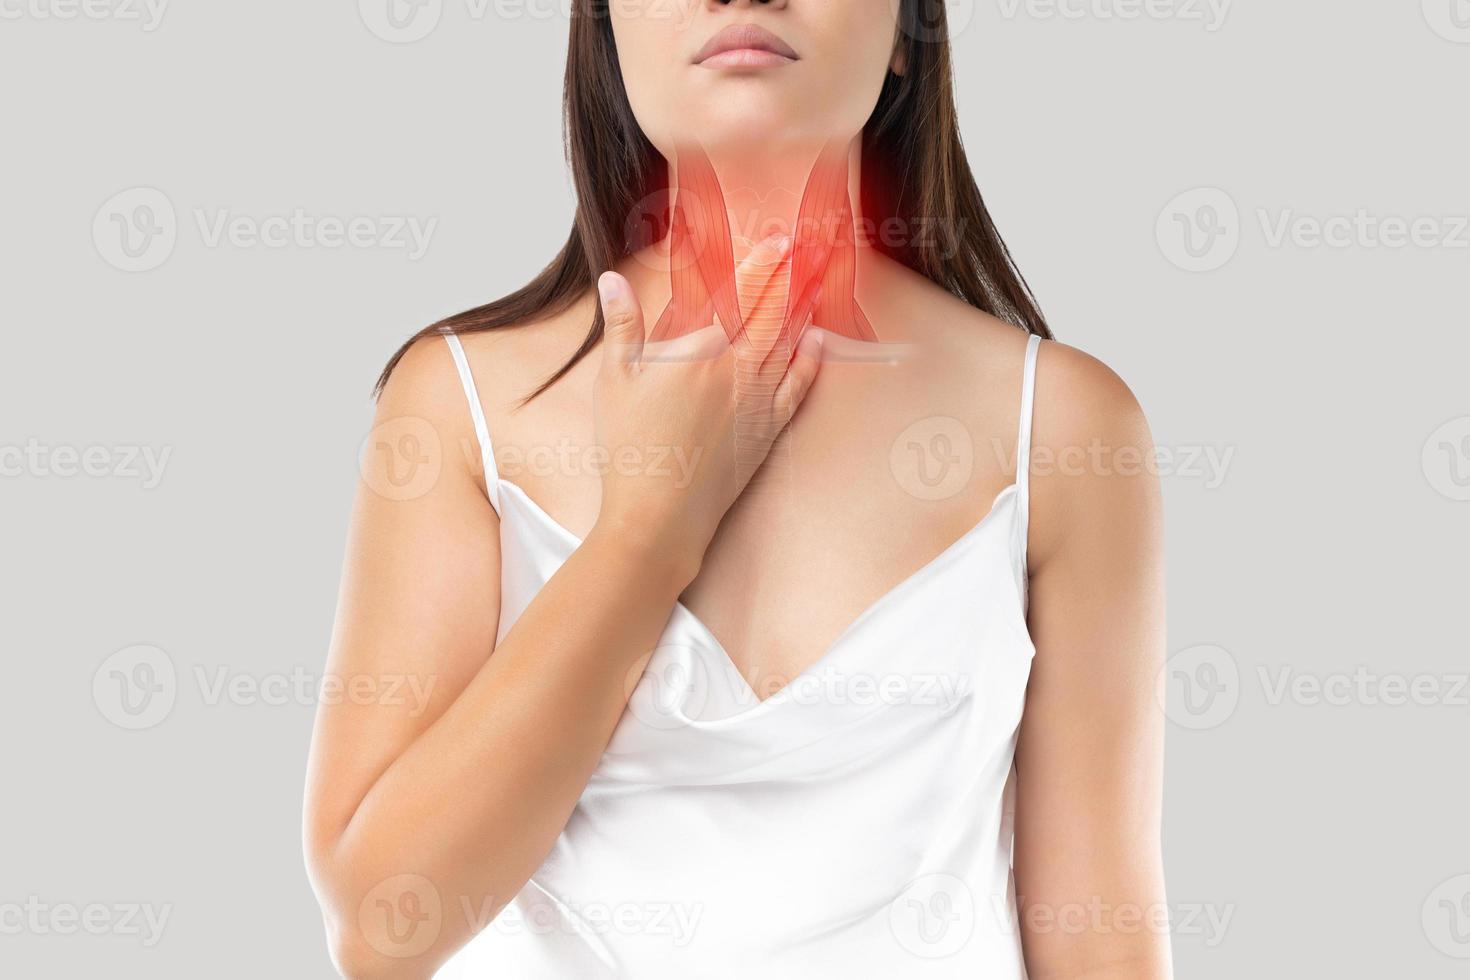 Women suffer from neck pain due to inflamed throat muscles. photo